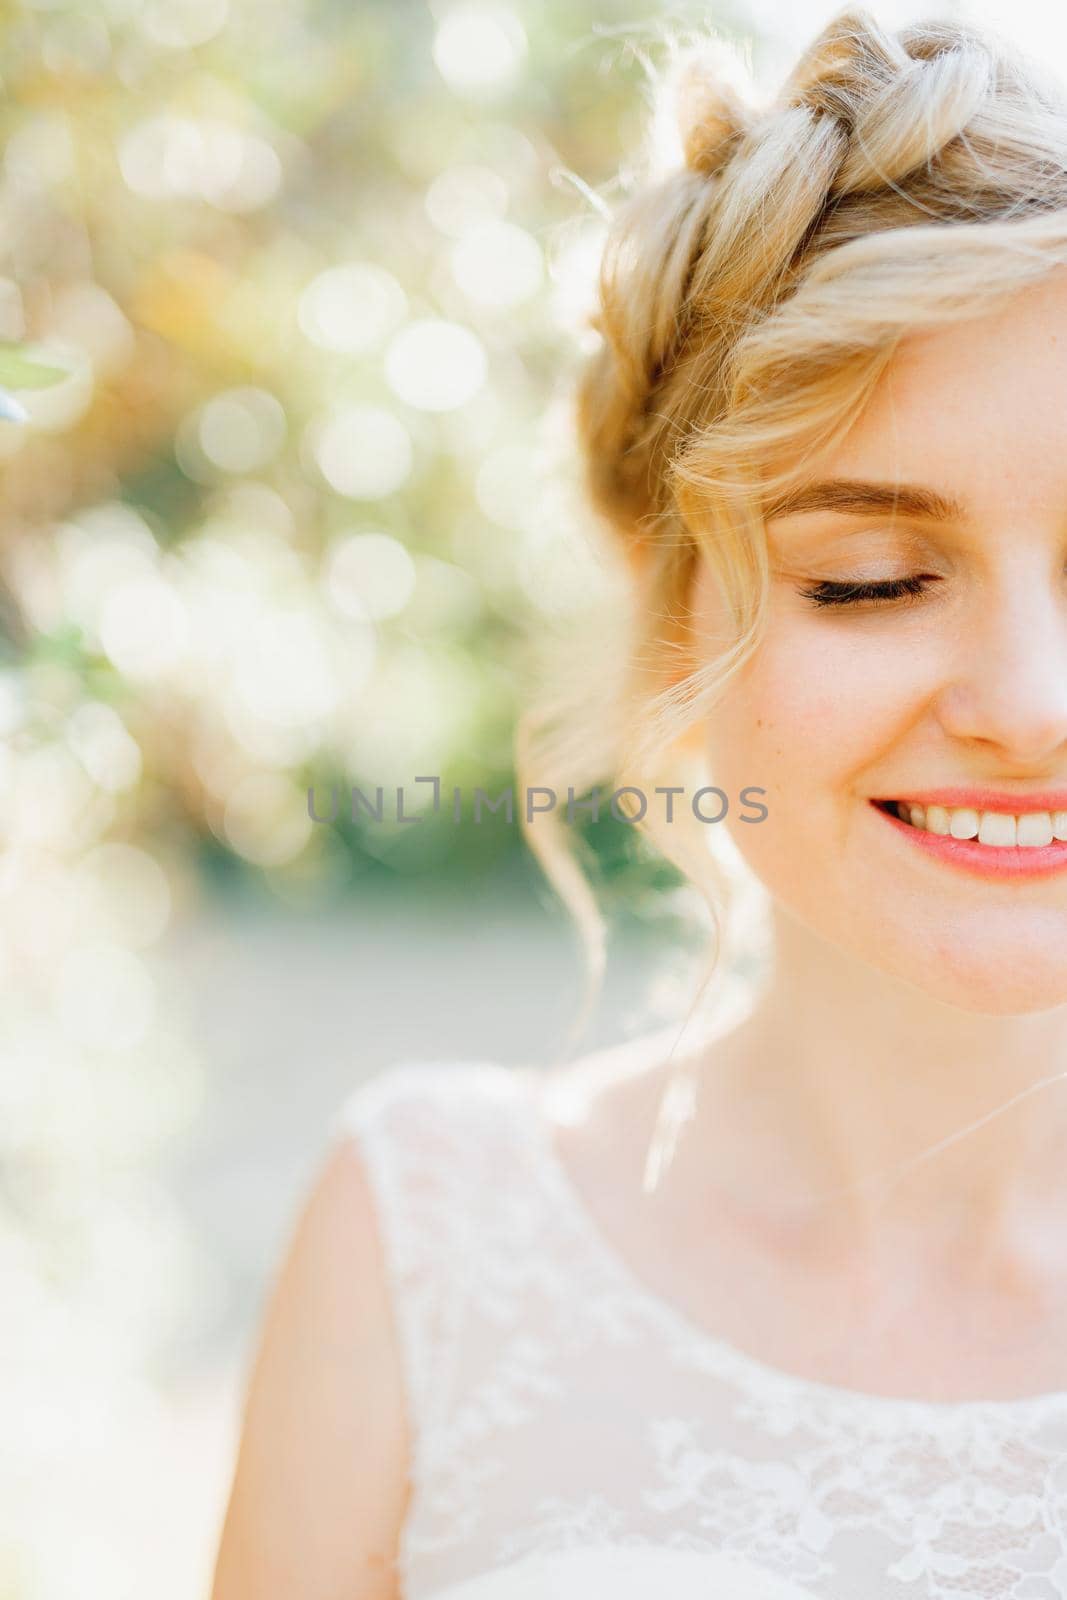 Blonde woman with beautiful hairstyle smiling happily with closed eyes on a sunny day, close-up . High quality photo